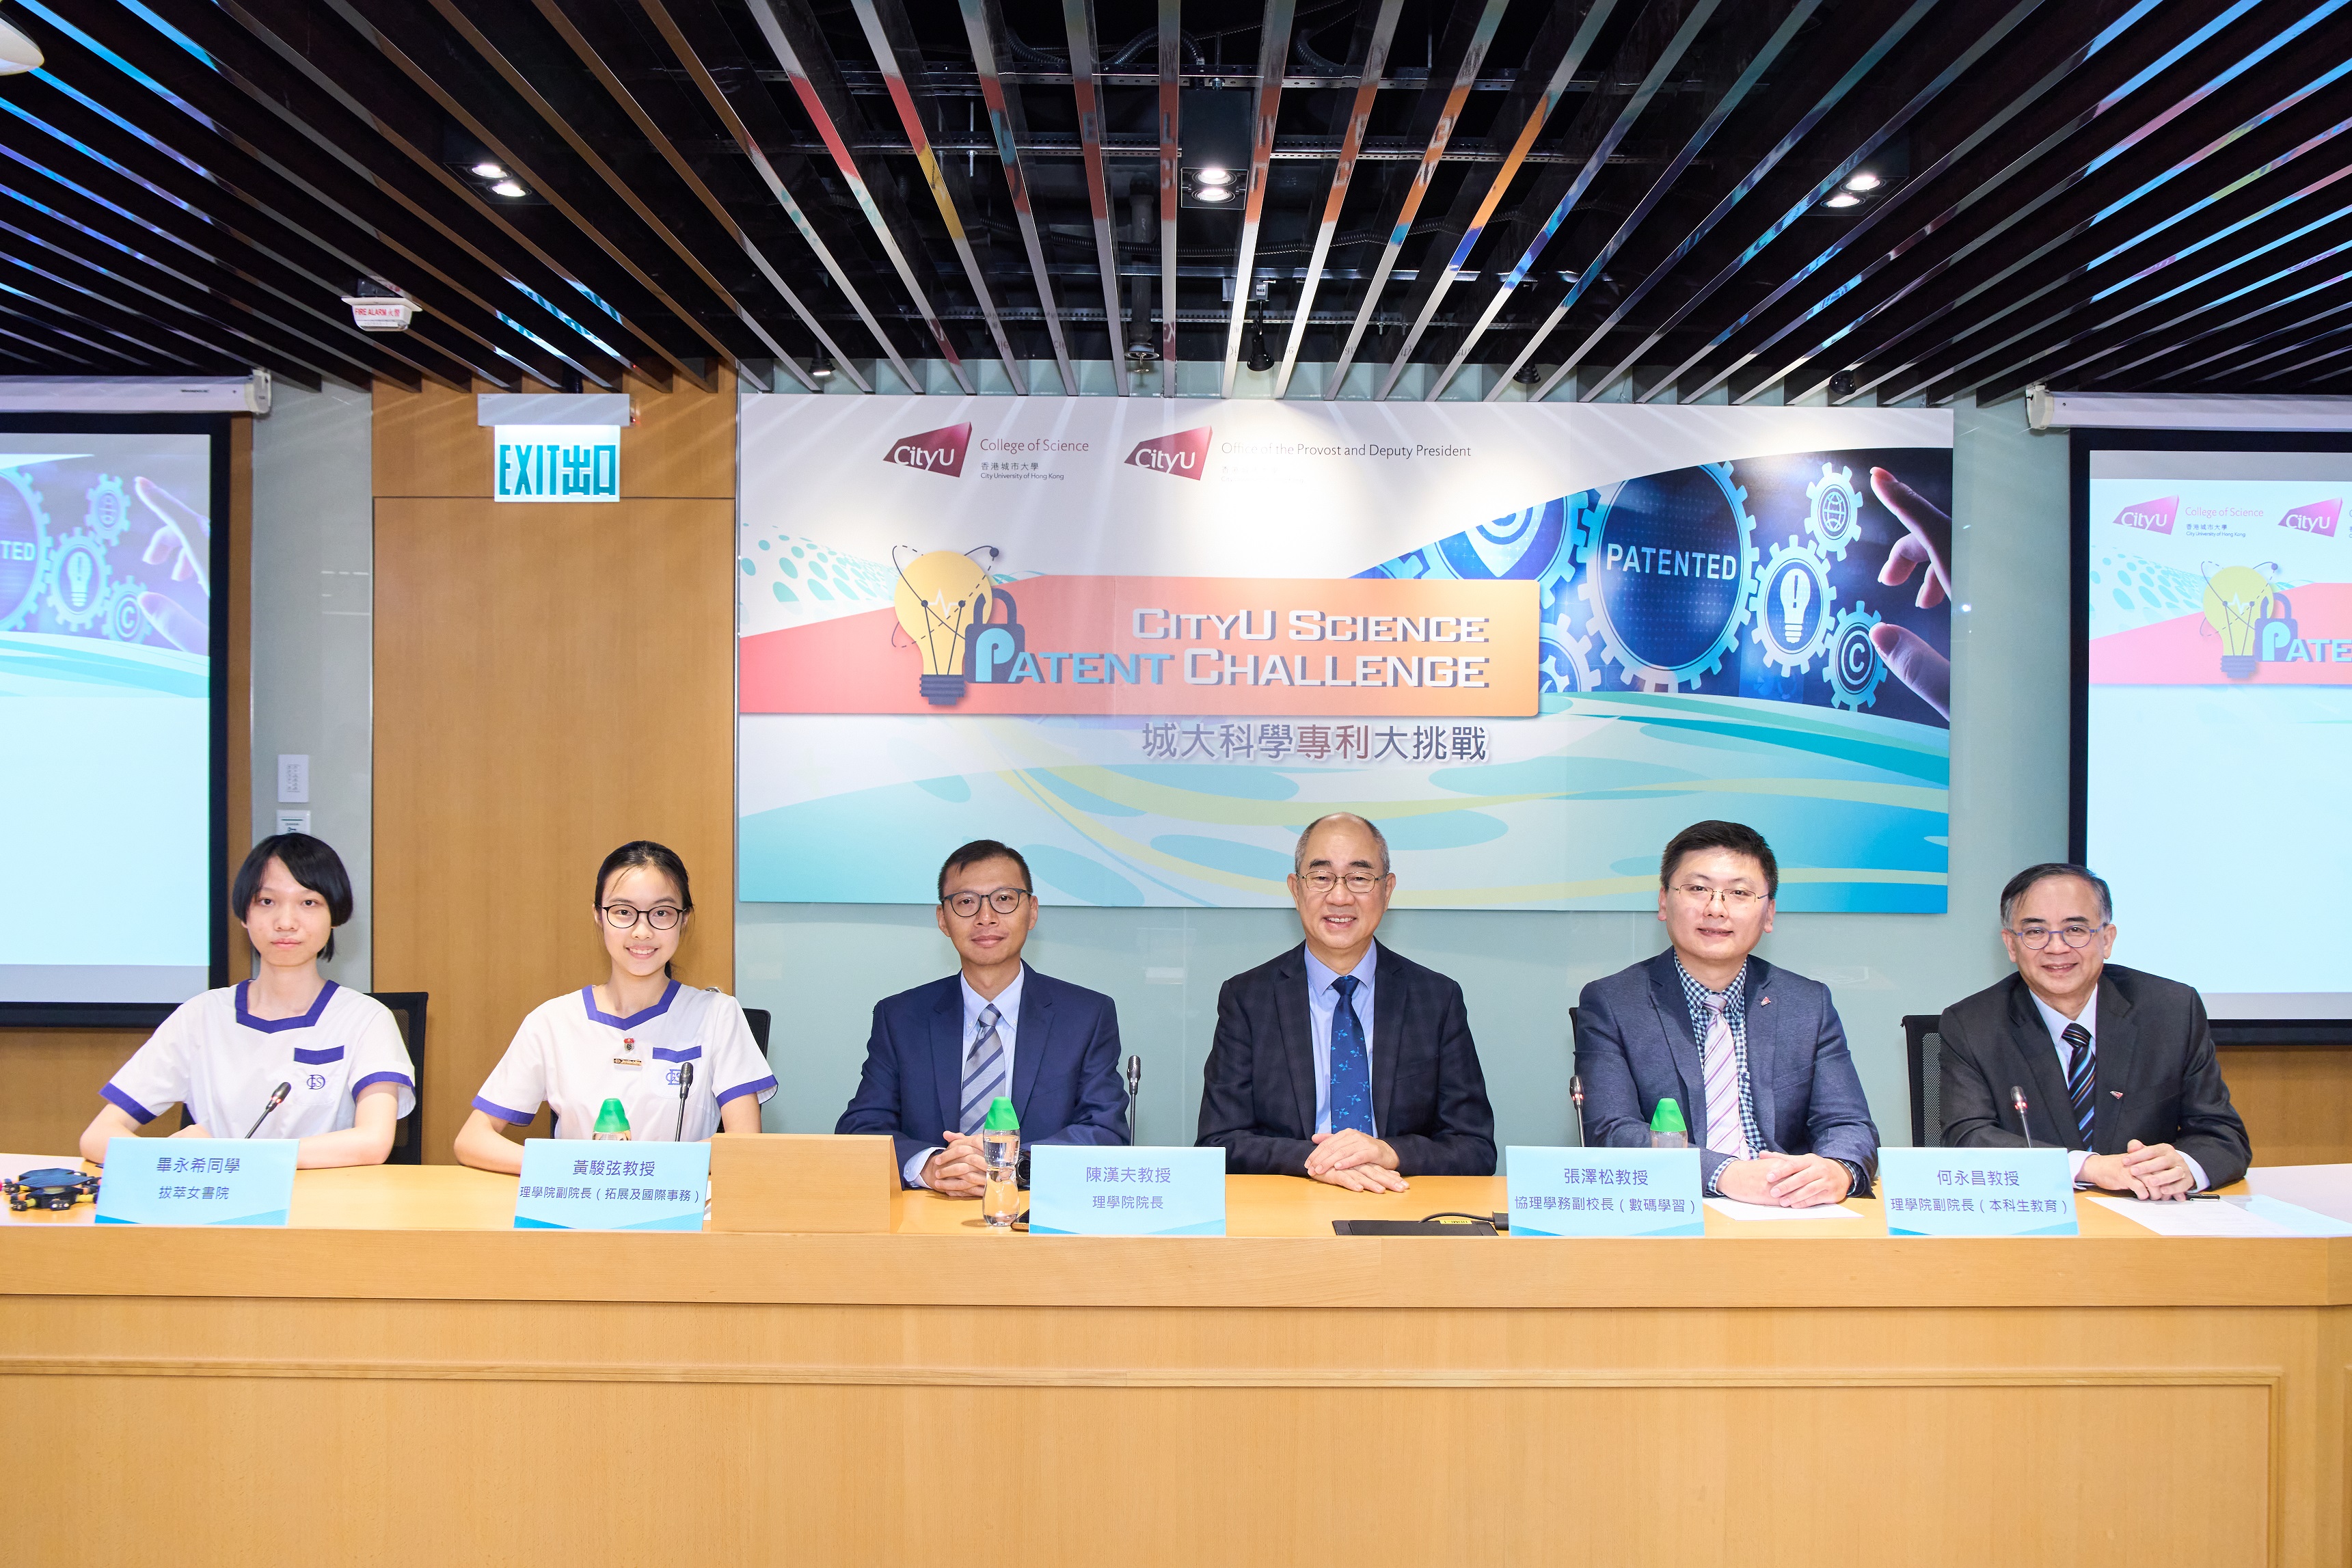 CityU’s Office of the Provost and Deputy President and the College of Science (CSCI) co-host a press conference to share about the “CityU Science Patent Challenge”. 